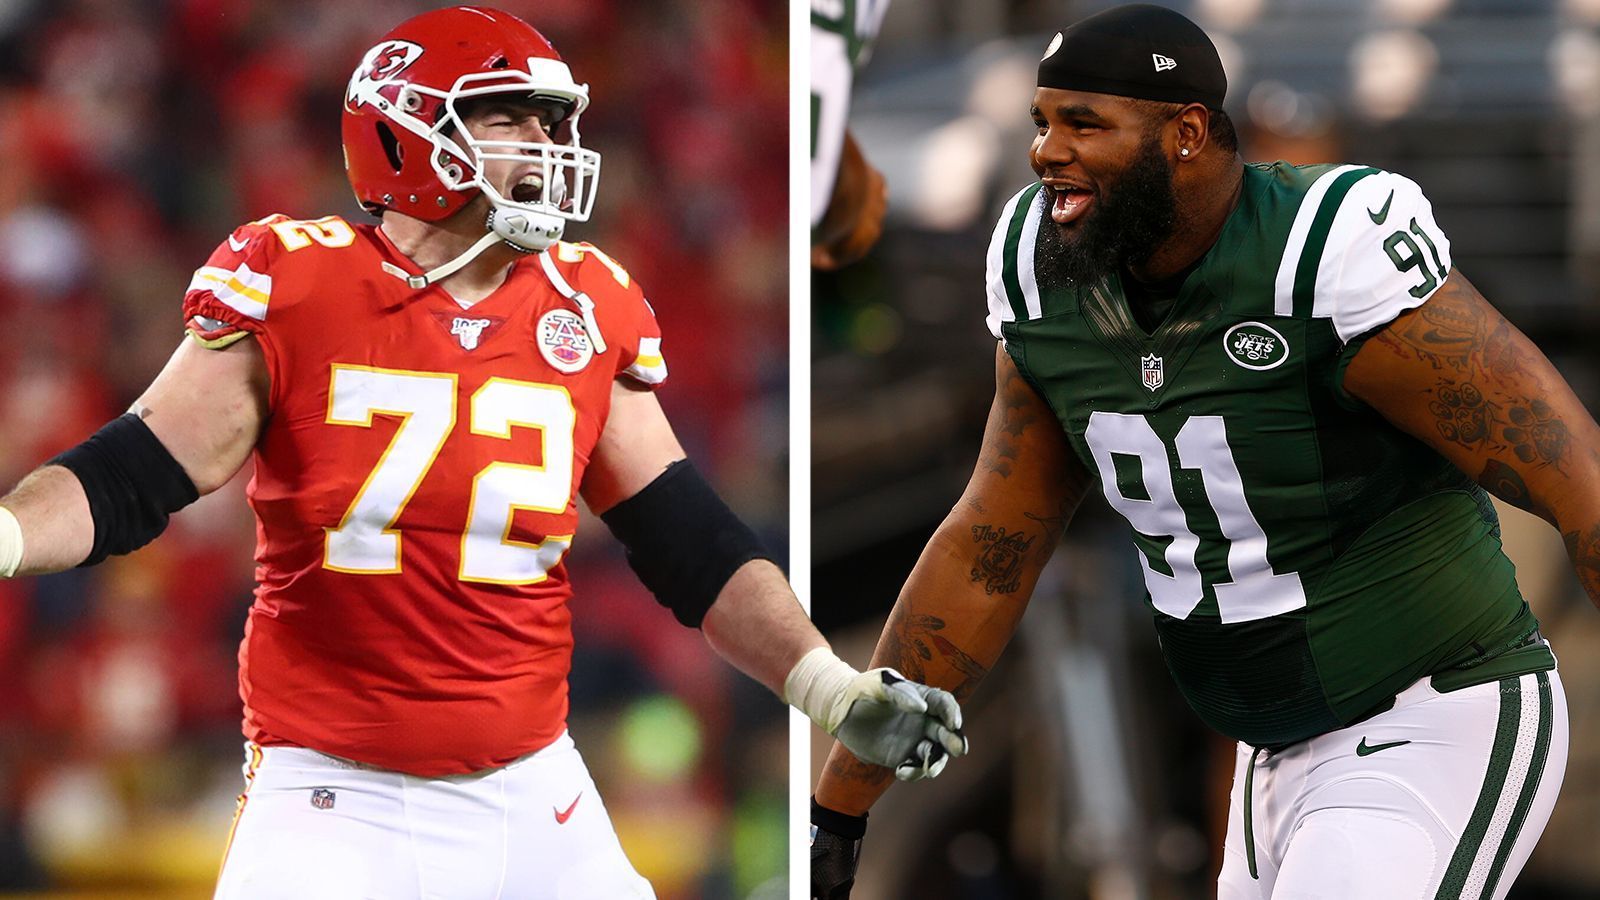 
                <strong>NFL Draft 2013</strong><br>
                &#x2022; Nummer-1-Pick: Offensive Tackle <strong>Eric Fisher</strong> – 2x Pro Bowl<br>&#x2022; Nummer-13-Pick: Defensive Tackle <strong>Sheldon Richardson</strong> – 1x Pro Bowl, Defensive Rookie of the Year<br>
              